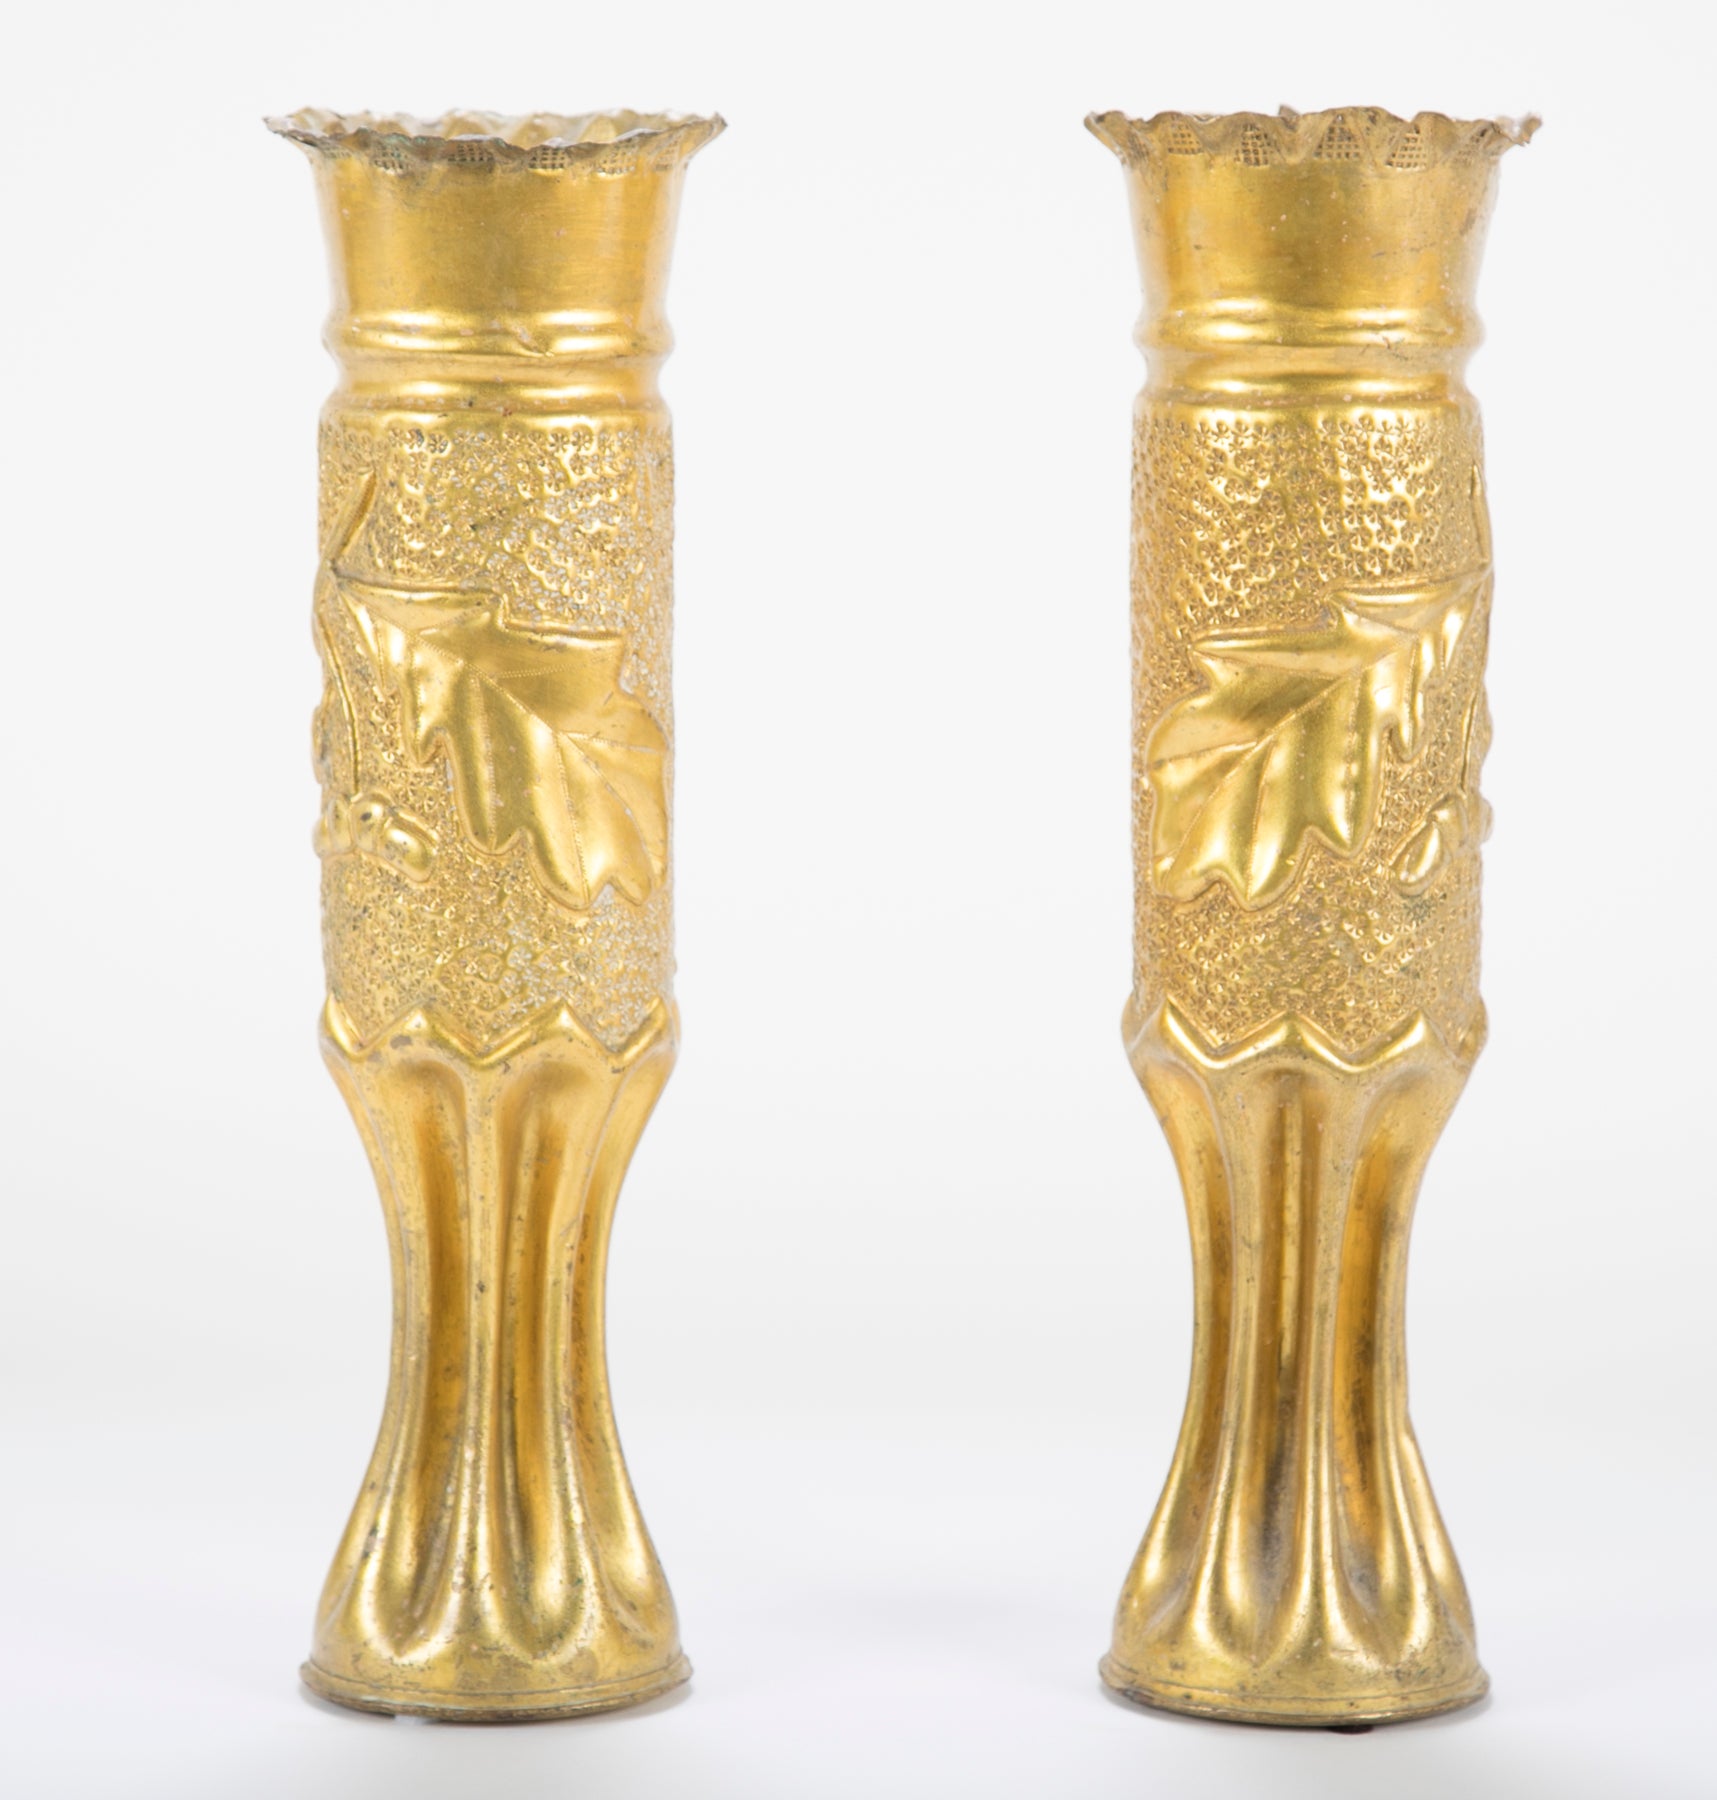 Trench / Folk Art Pair of Vases from French WW I Artillery Shell Casings